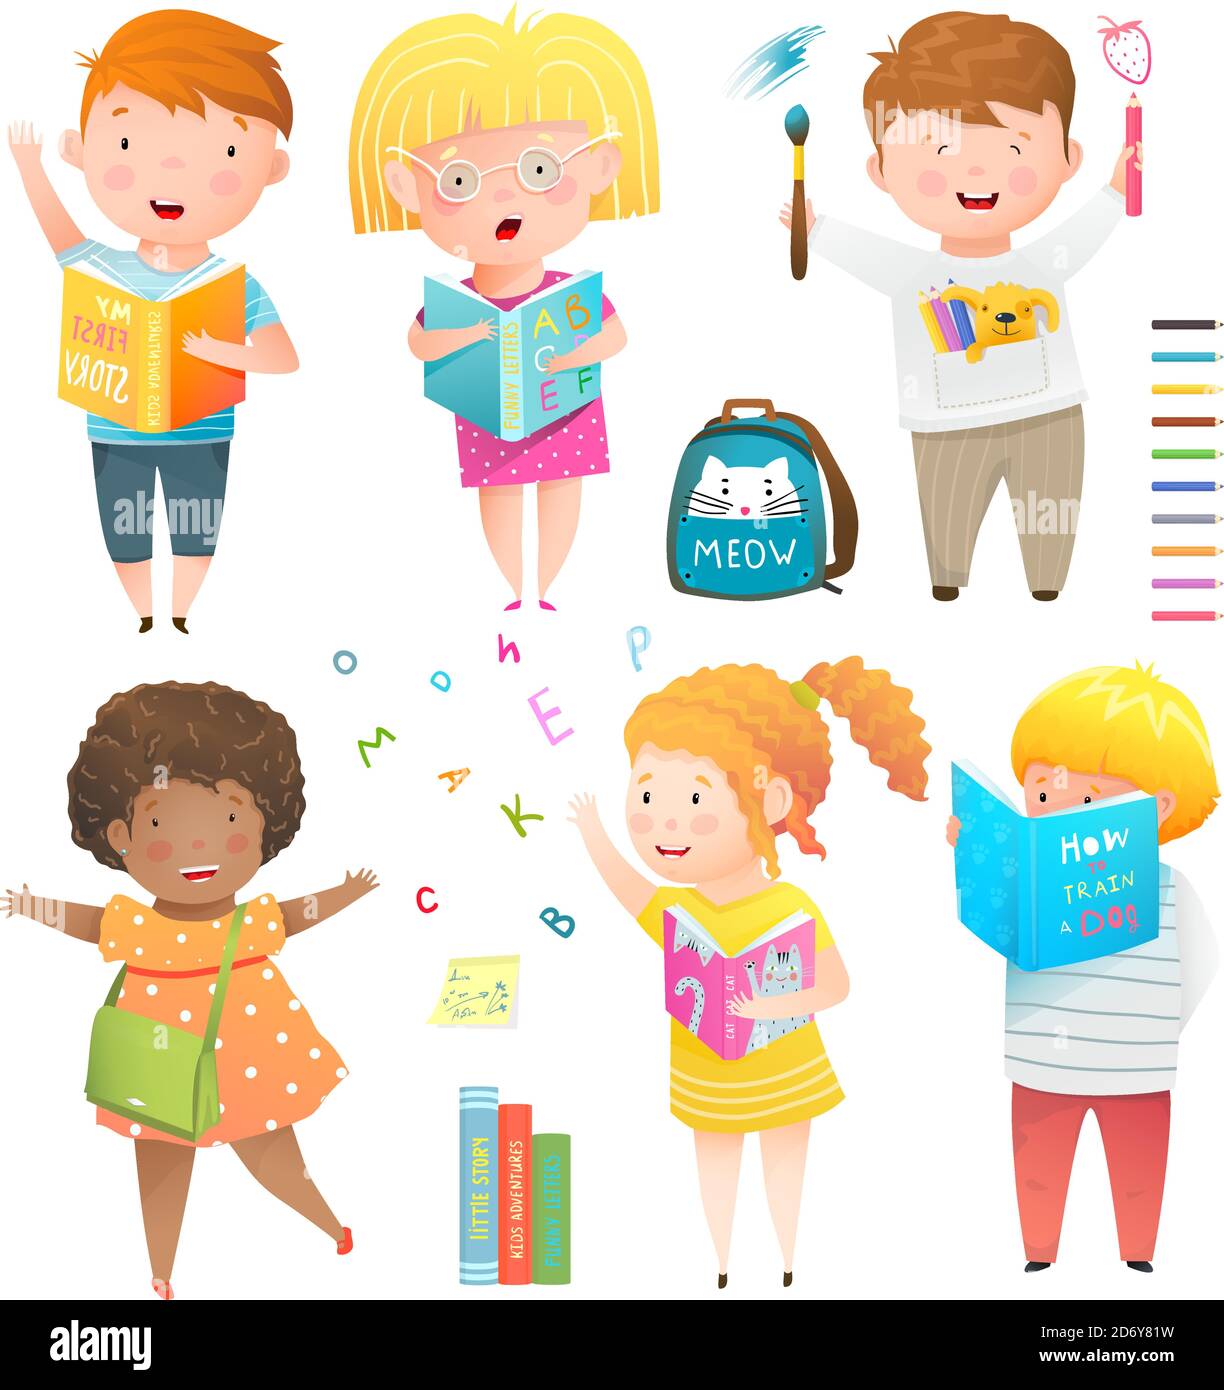 Studying, drawing, reading children activities clipart collection. Kids playing at school or kindergarten characters set. Stock Vector